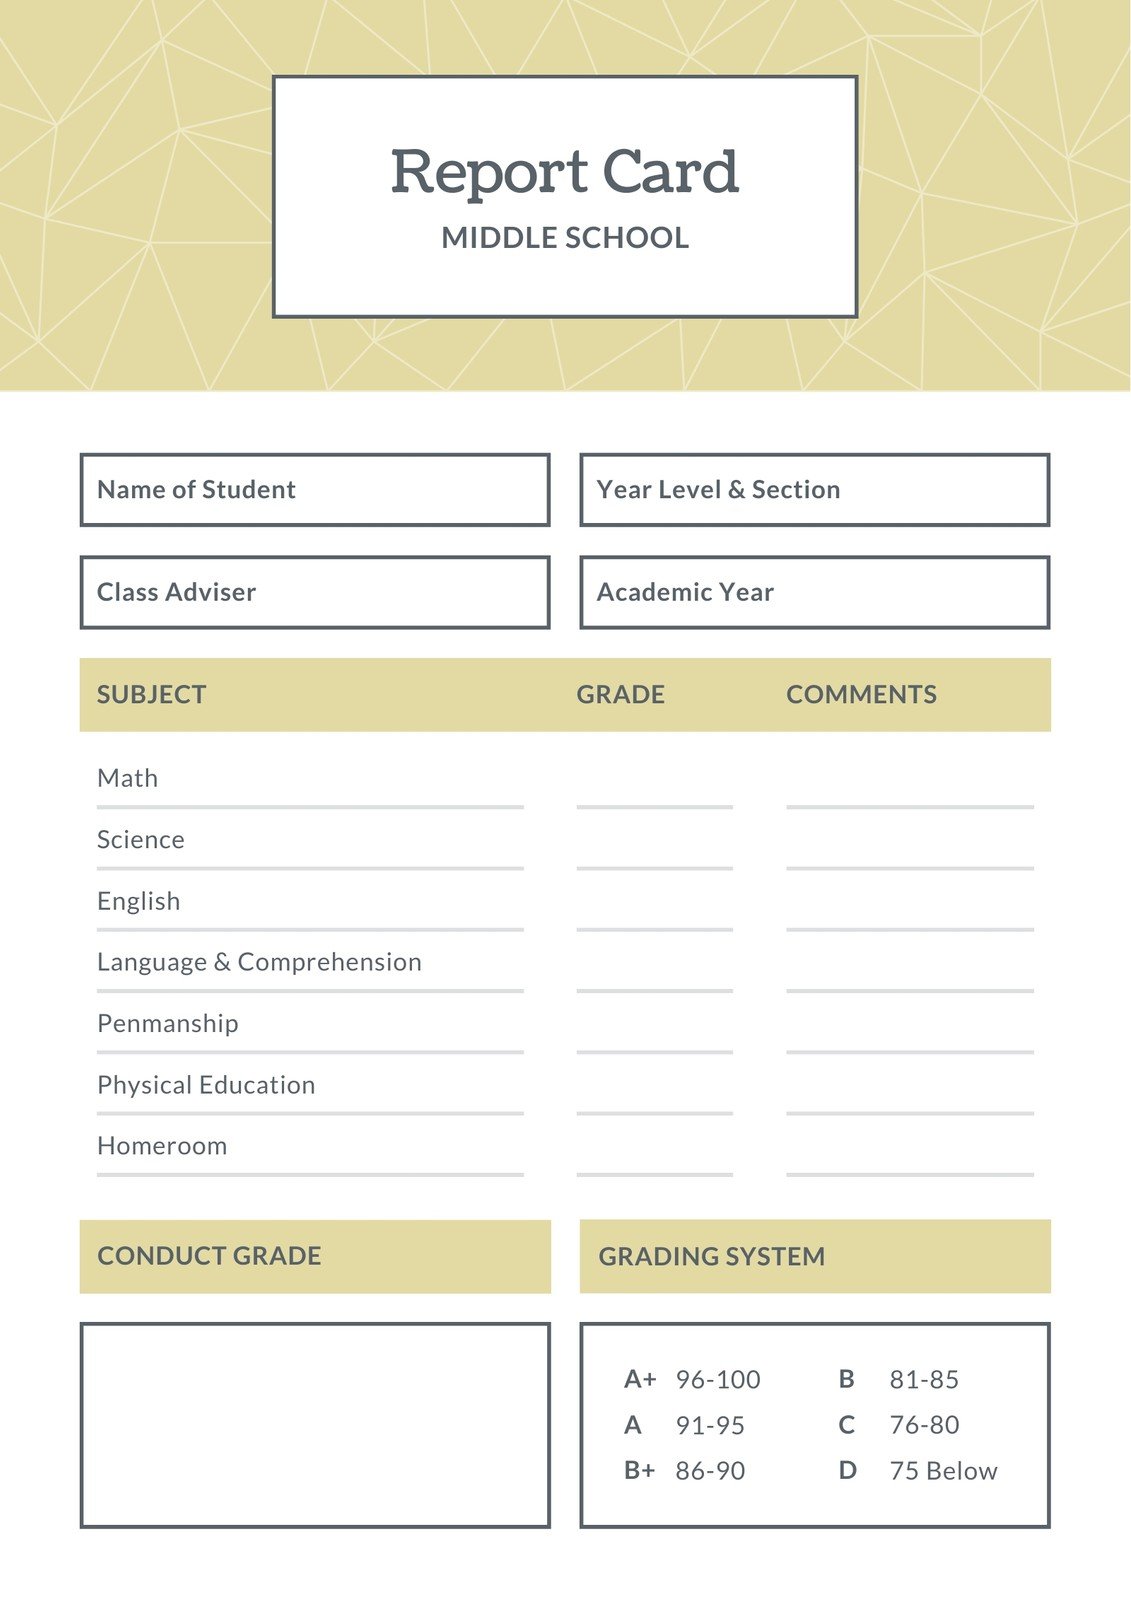 Customize 21+ Middle School Report Cards Templates Online - Canva Throughout Report Card Template Middle School